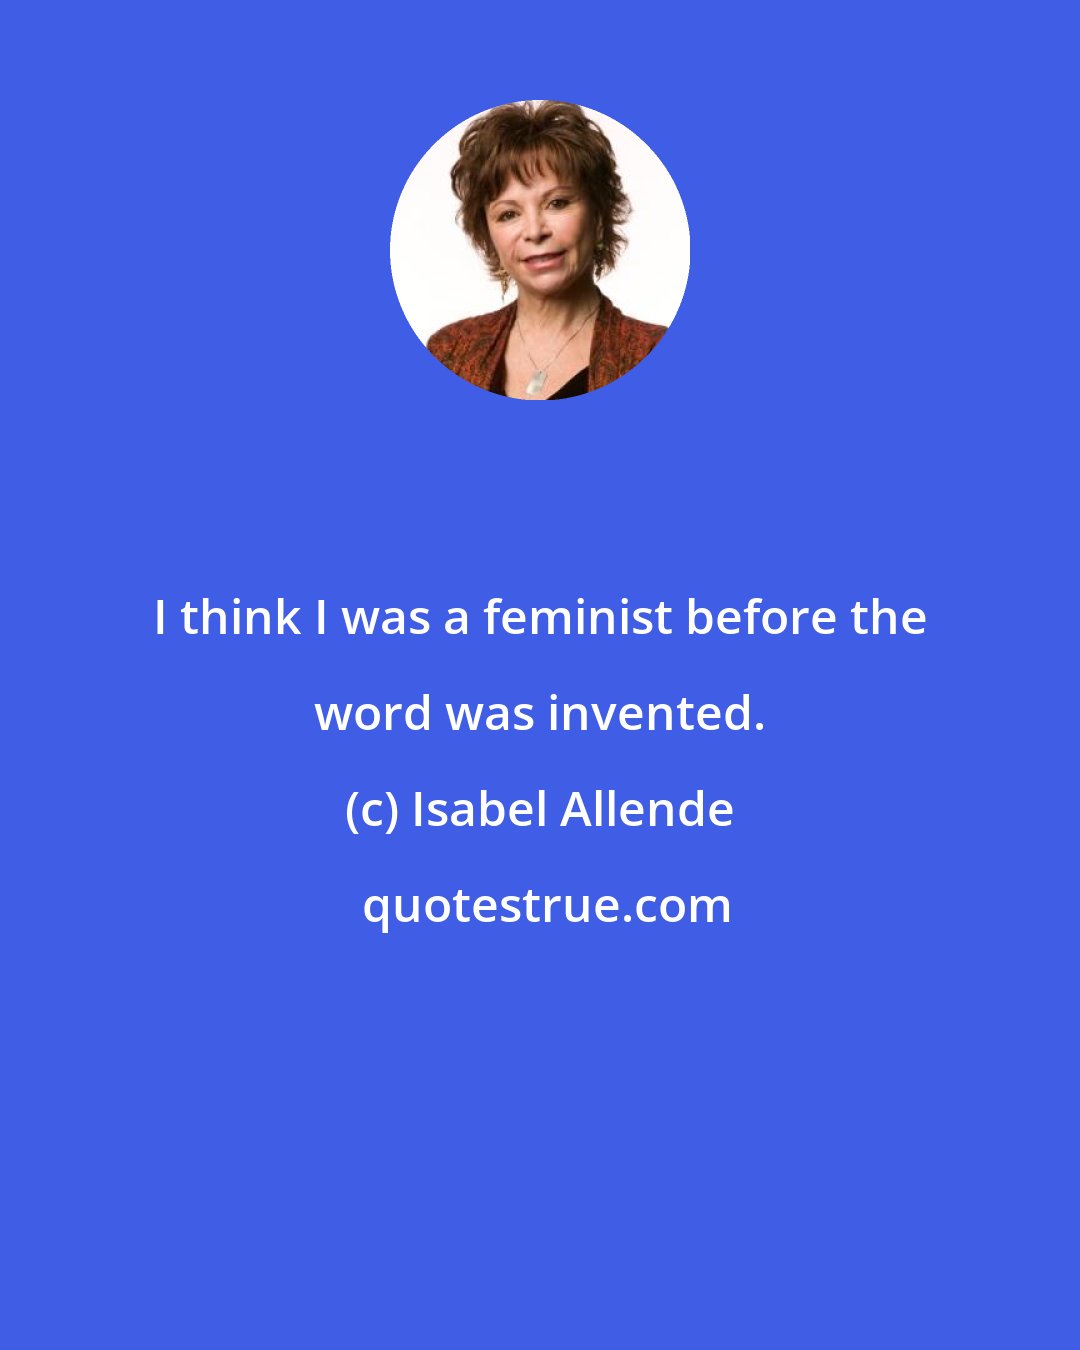 Isabel Allende: I think I was a feminist before the word was invented.